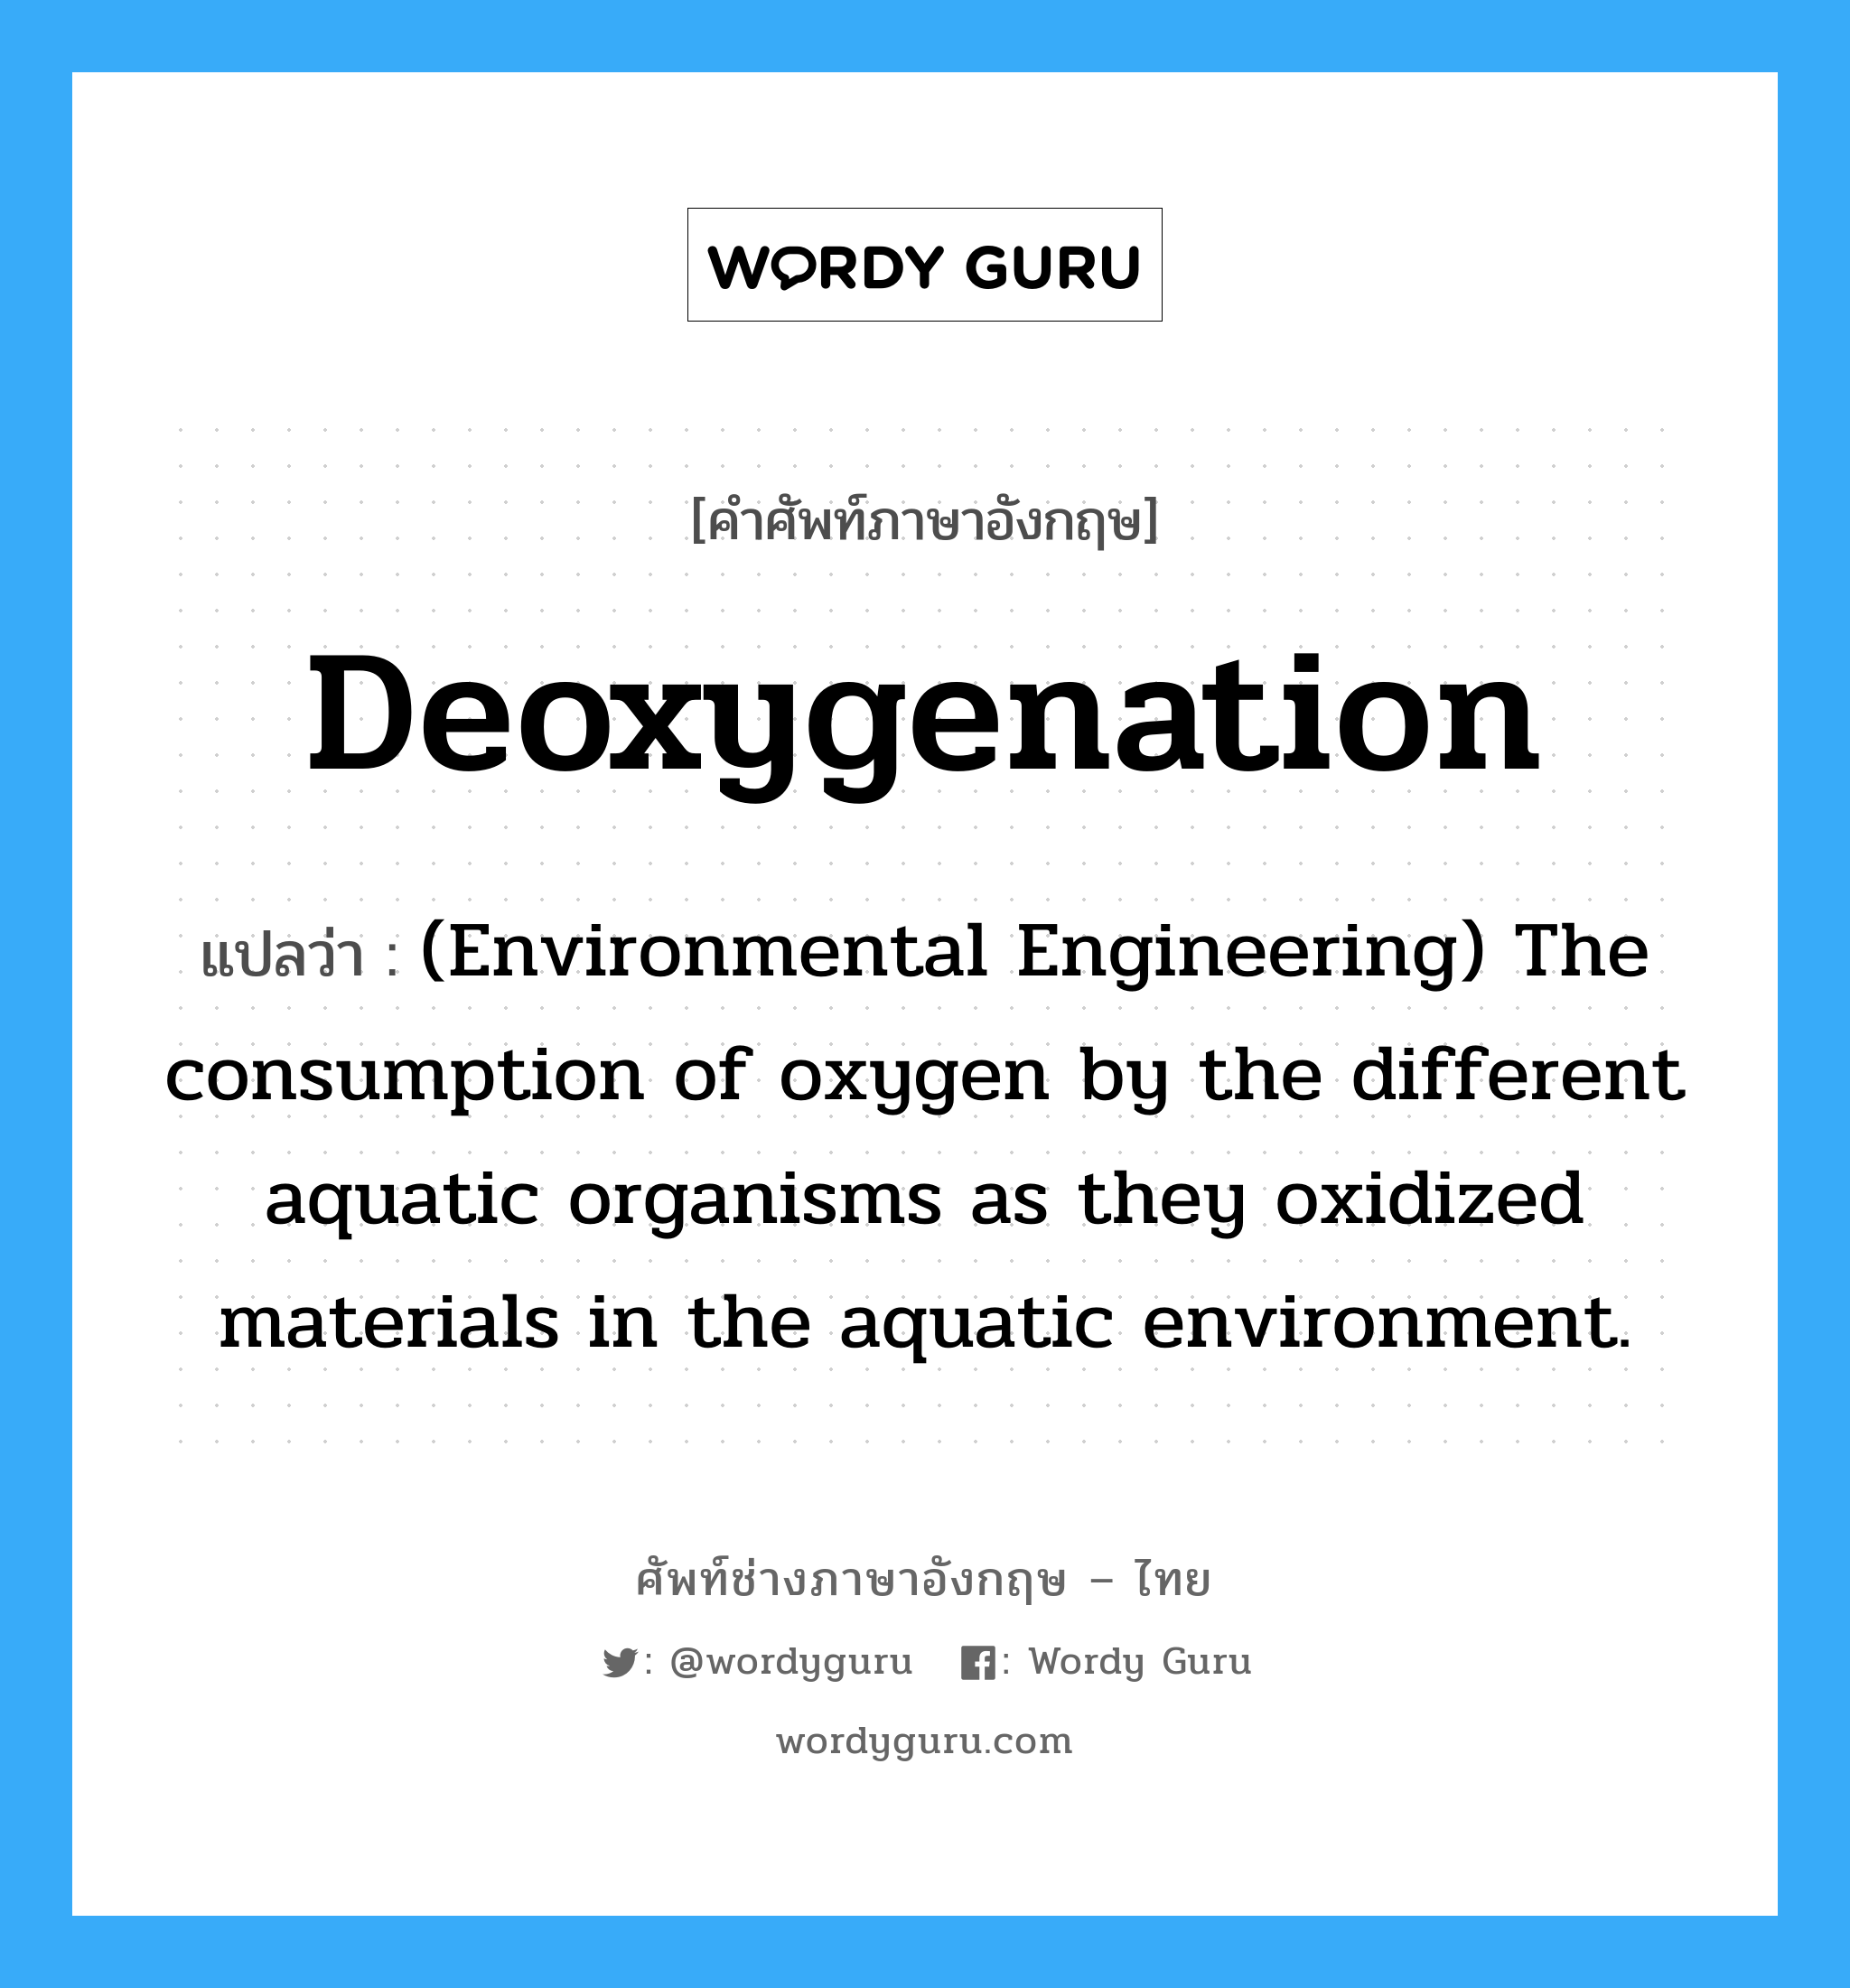 Deoxygenation แปลว่า?, คำศัพท์ช่างภาษาอังกฤษ - ไทย Deoxygenation คำศัพท์ภาษาอังกฤษ Deoxygenation แปลว่า (Environmental Engineering) The consumption of oxygen by the different aquatic organisms as they oxidized materials in the aquatic environment.